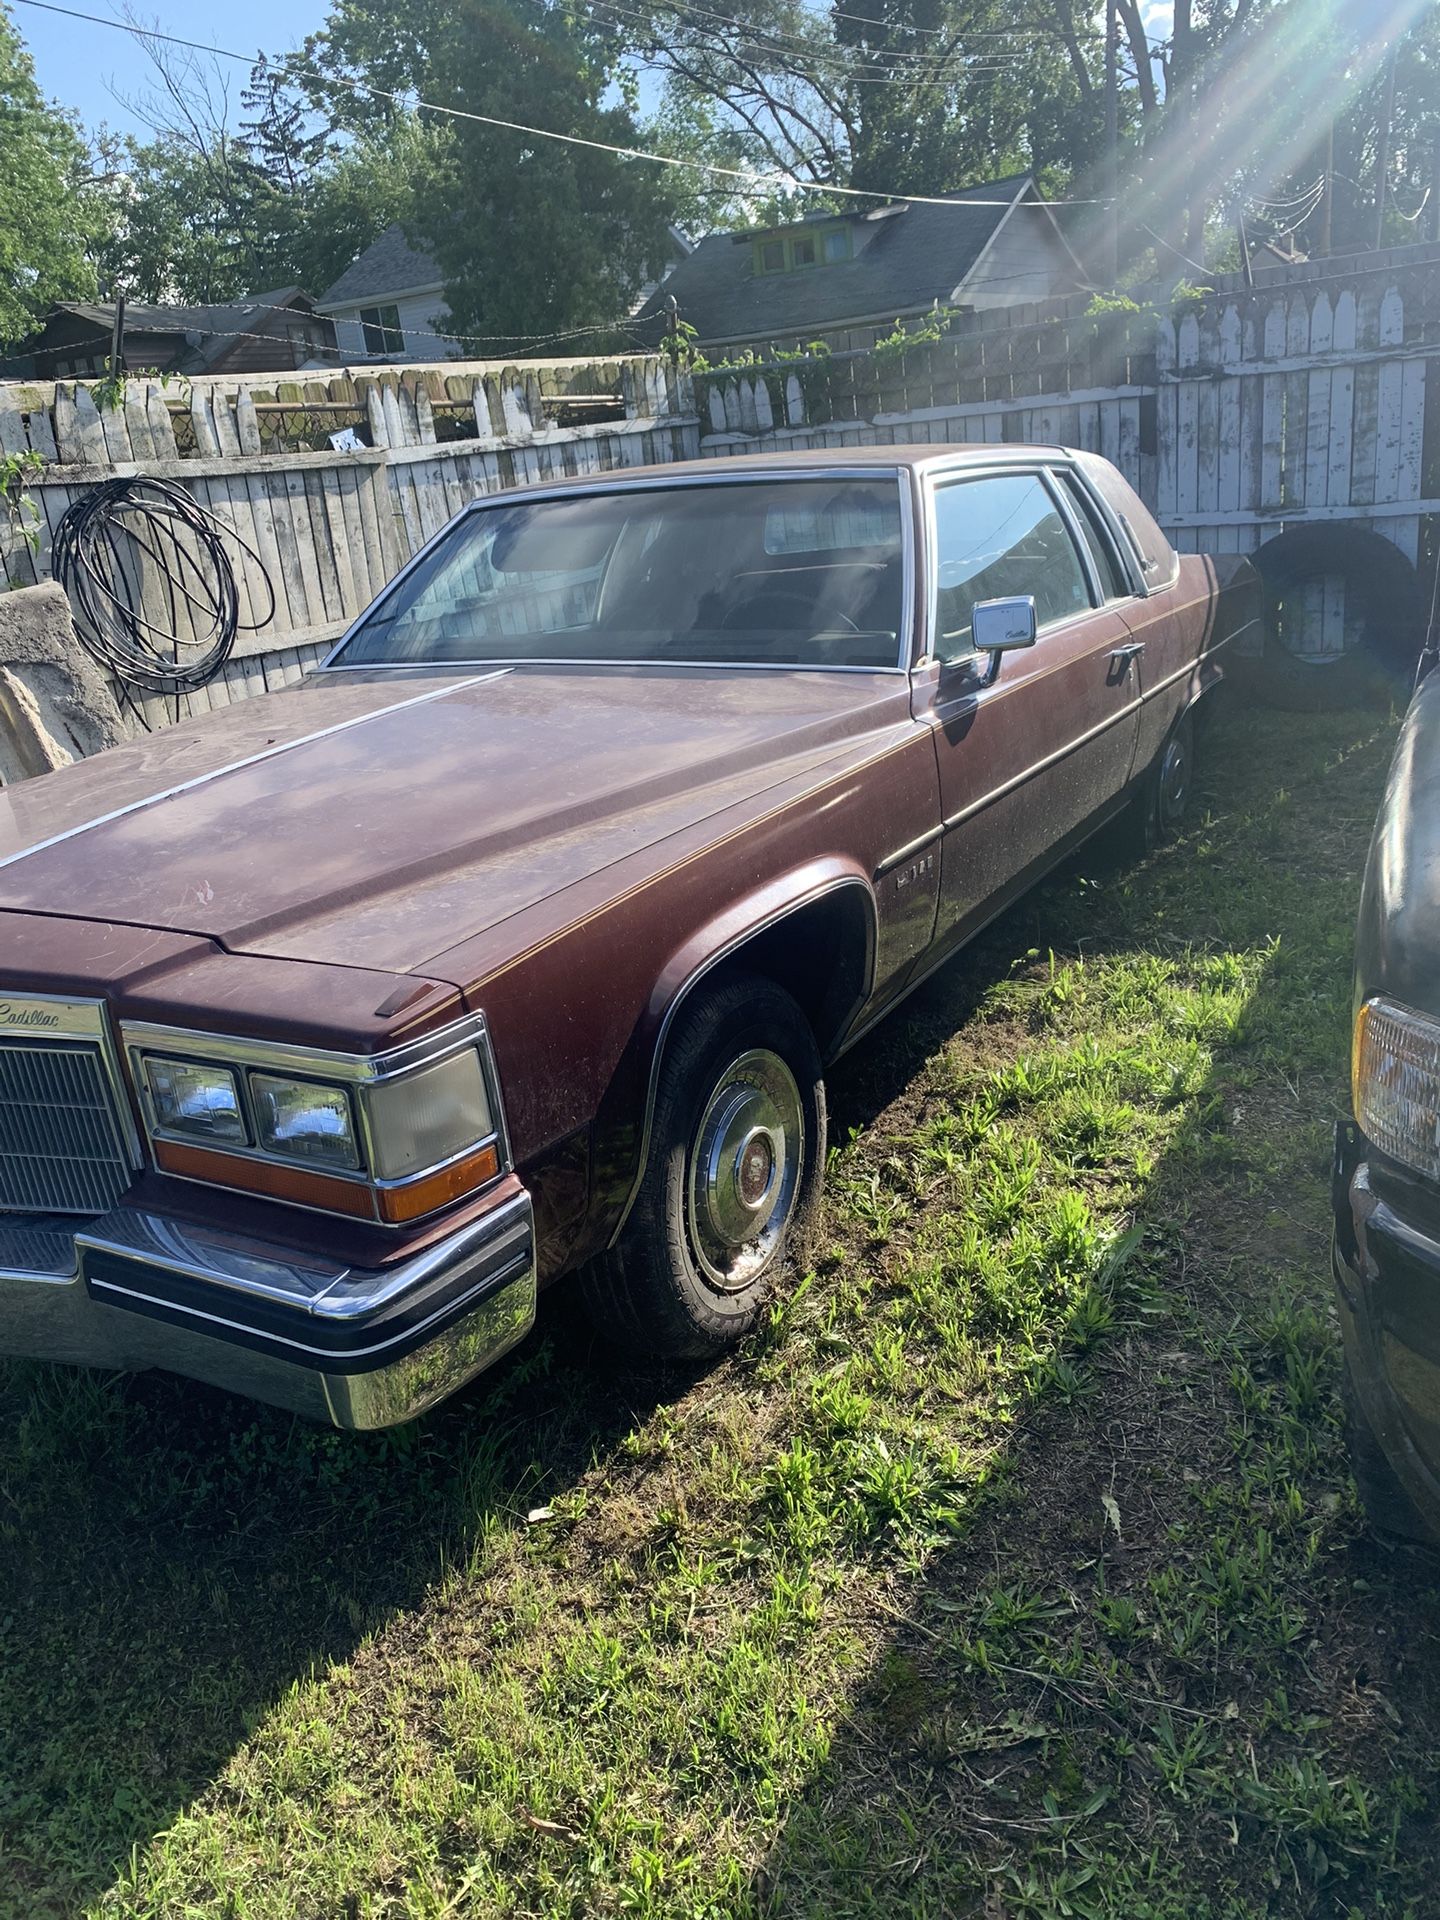 80 Caddy No Motor Or Trans… Solid Body With No Rust.. All Trim And Bumper Filler In Good Shape 